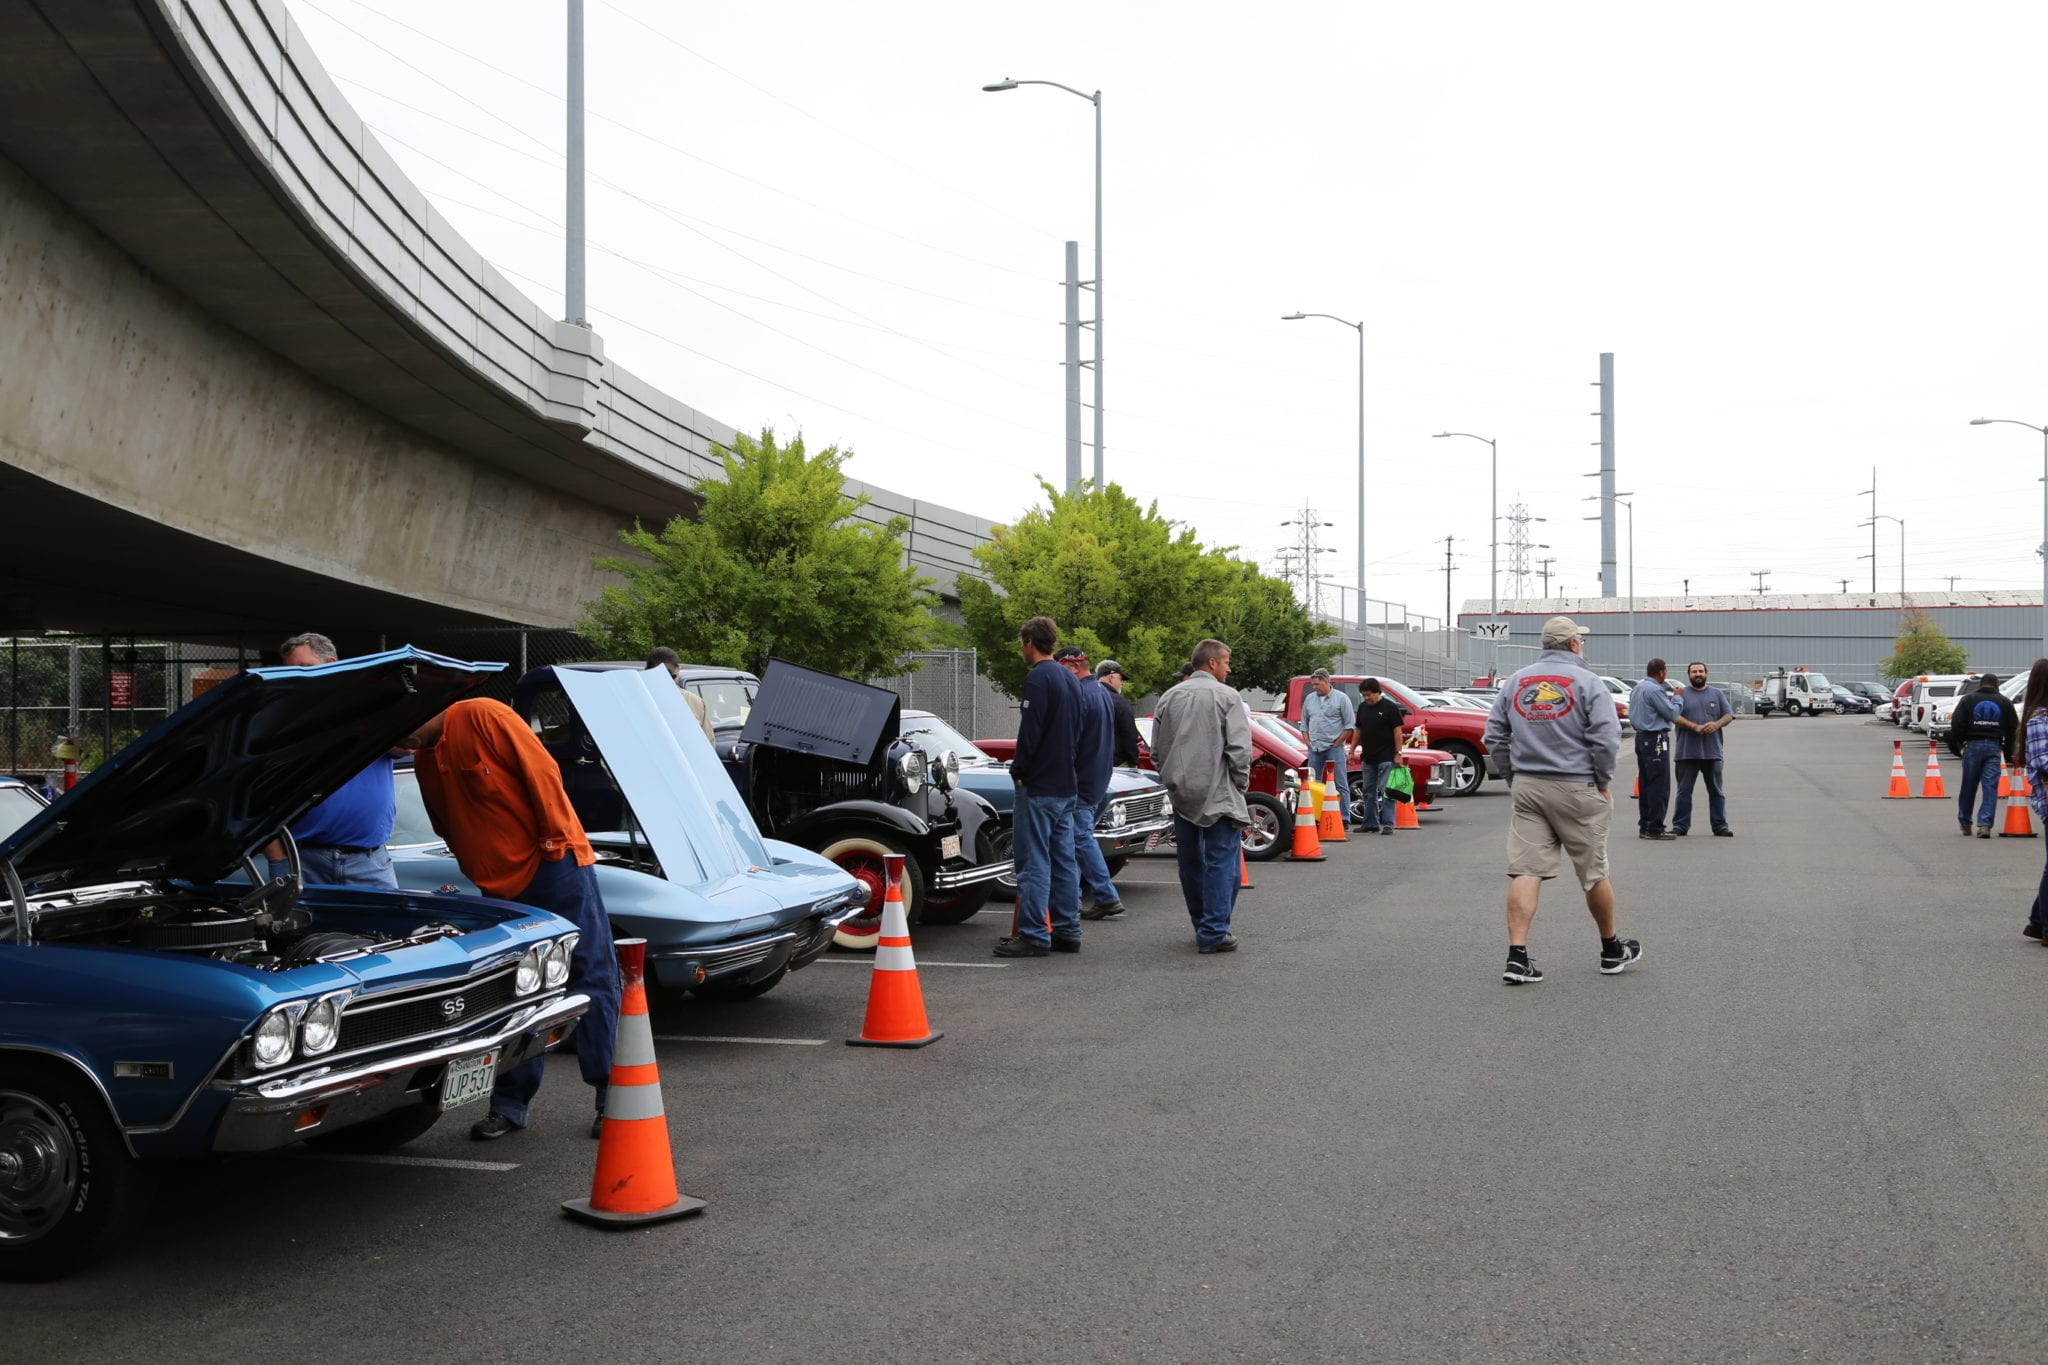 Employees enjoyed the diverse cars that were on display at the car show.